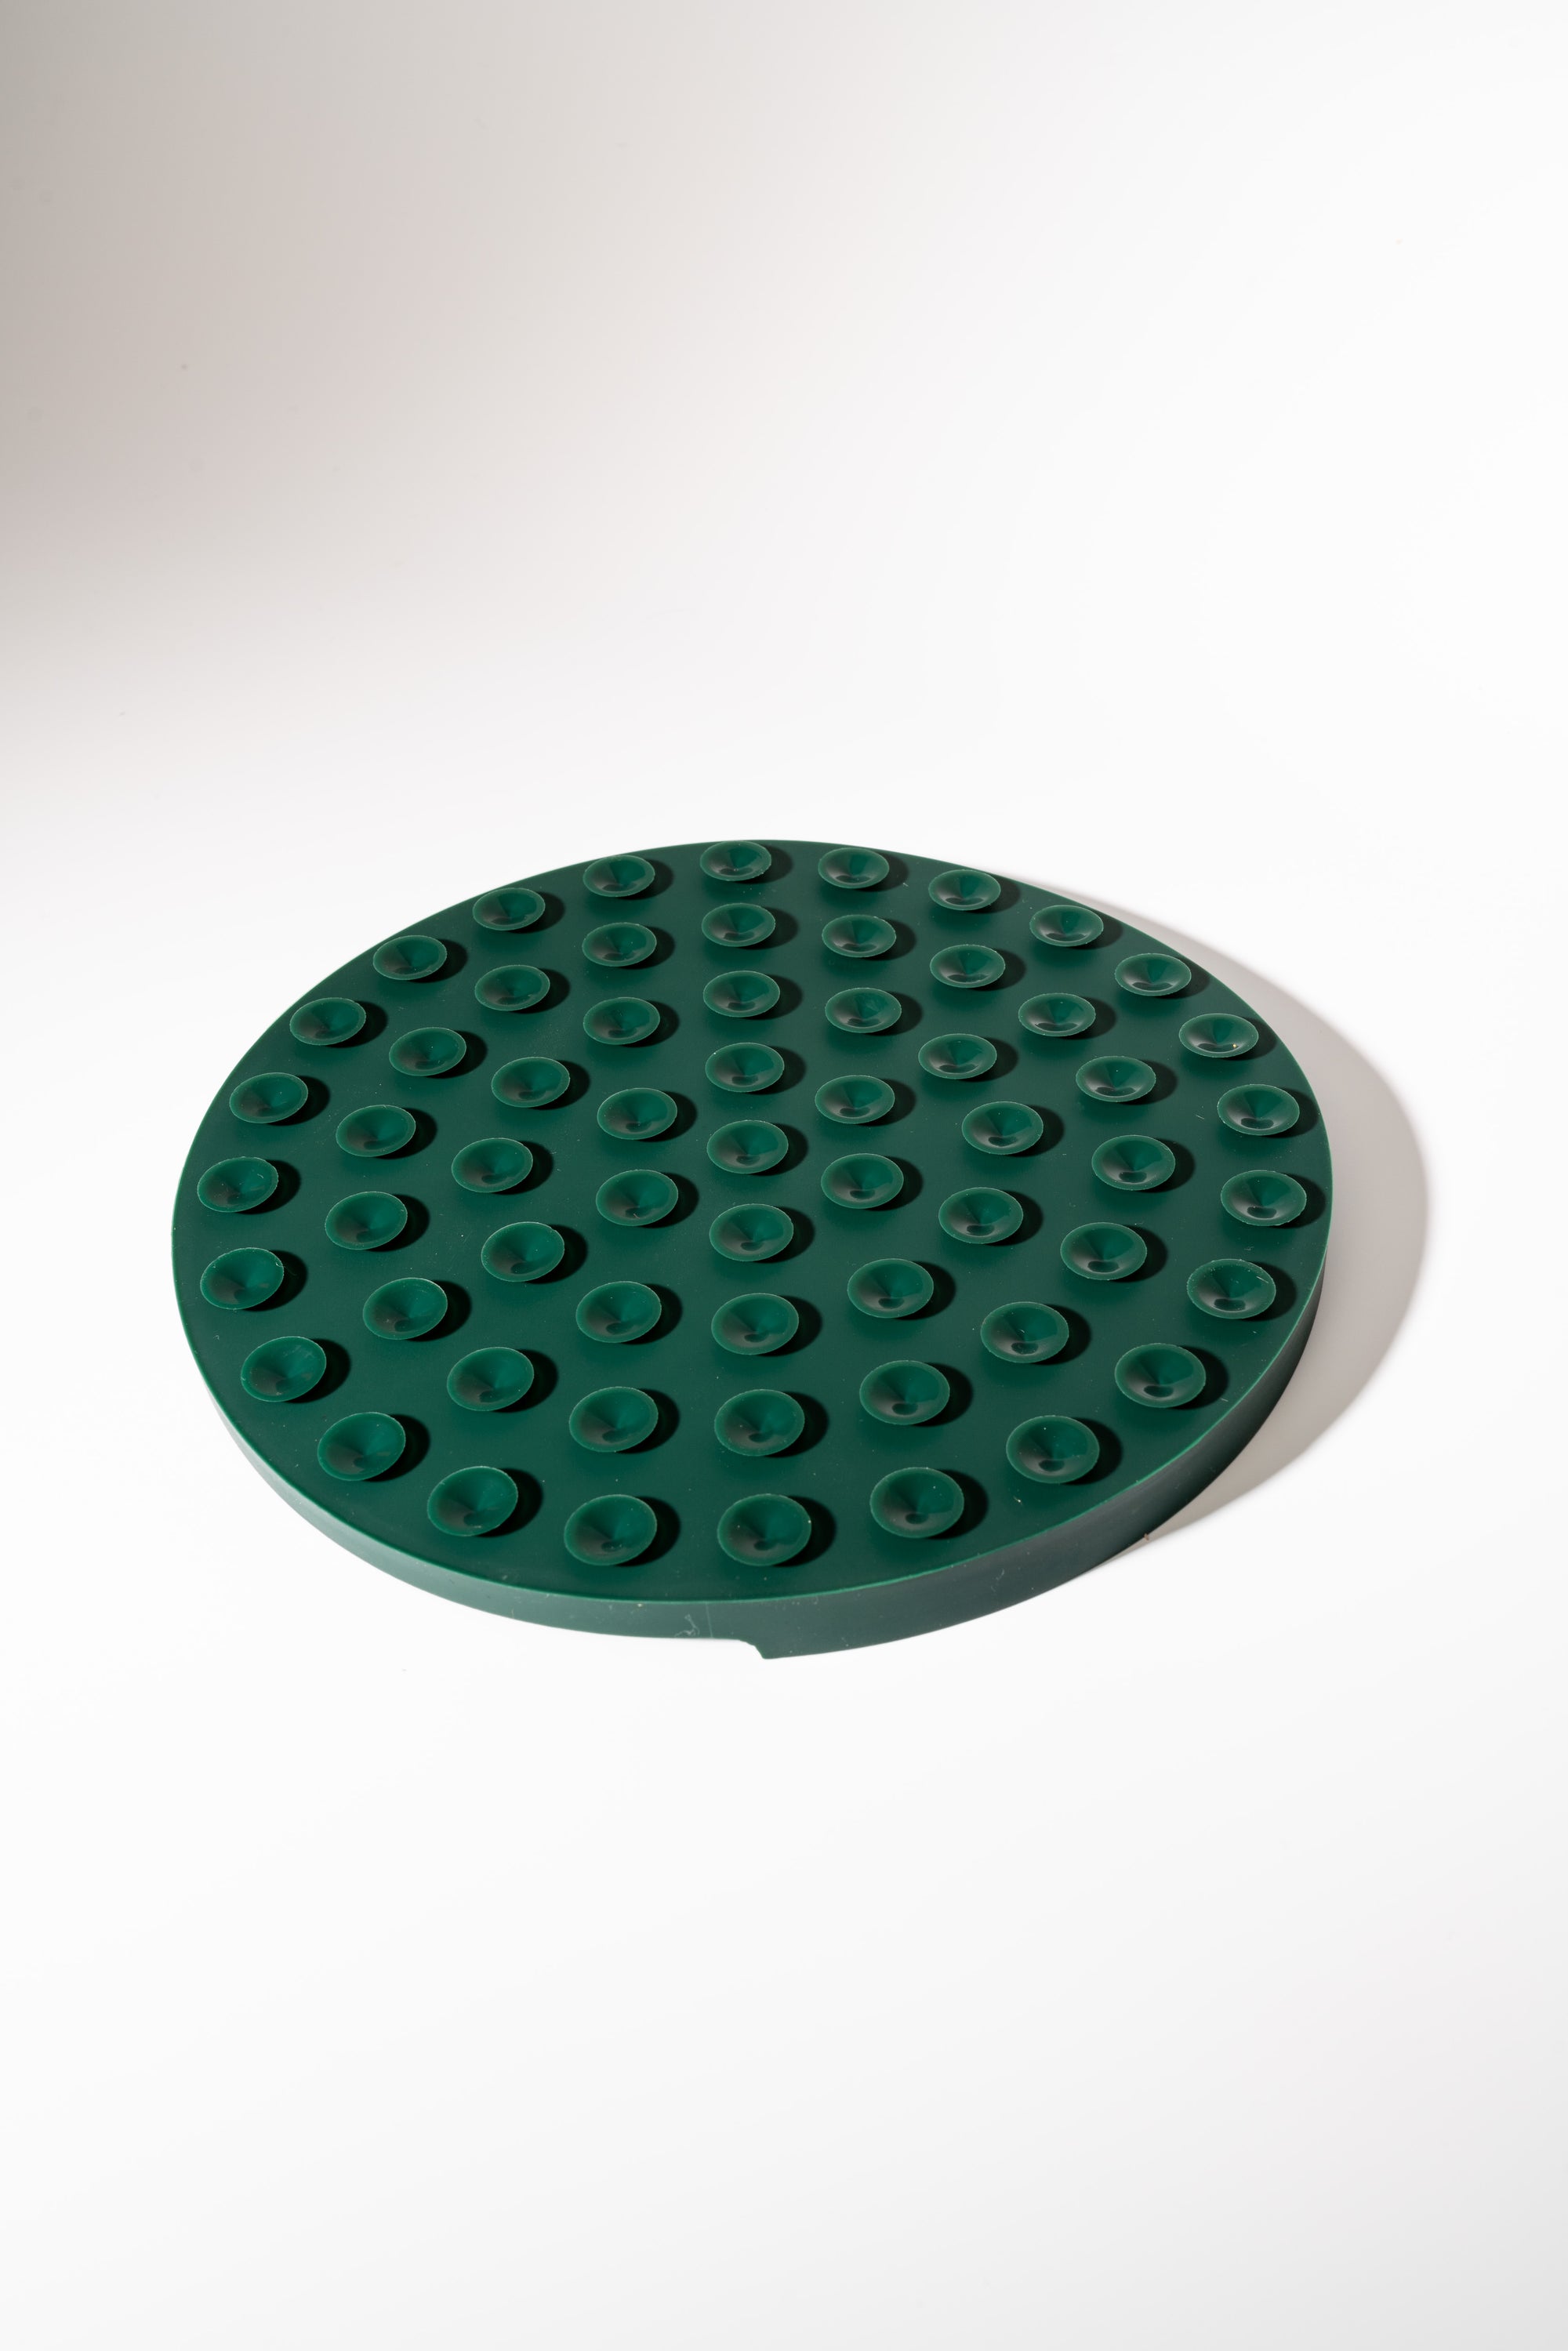 Lick Mat in forest green